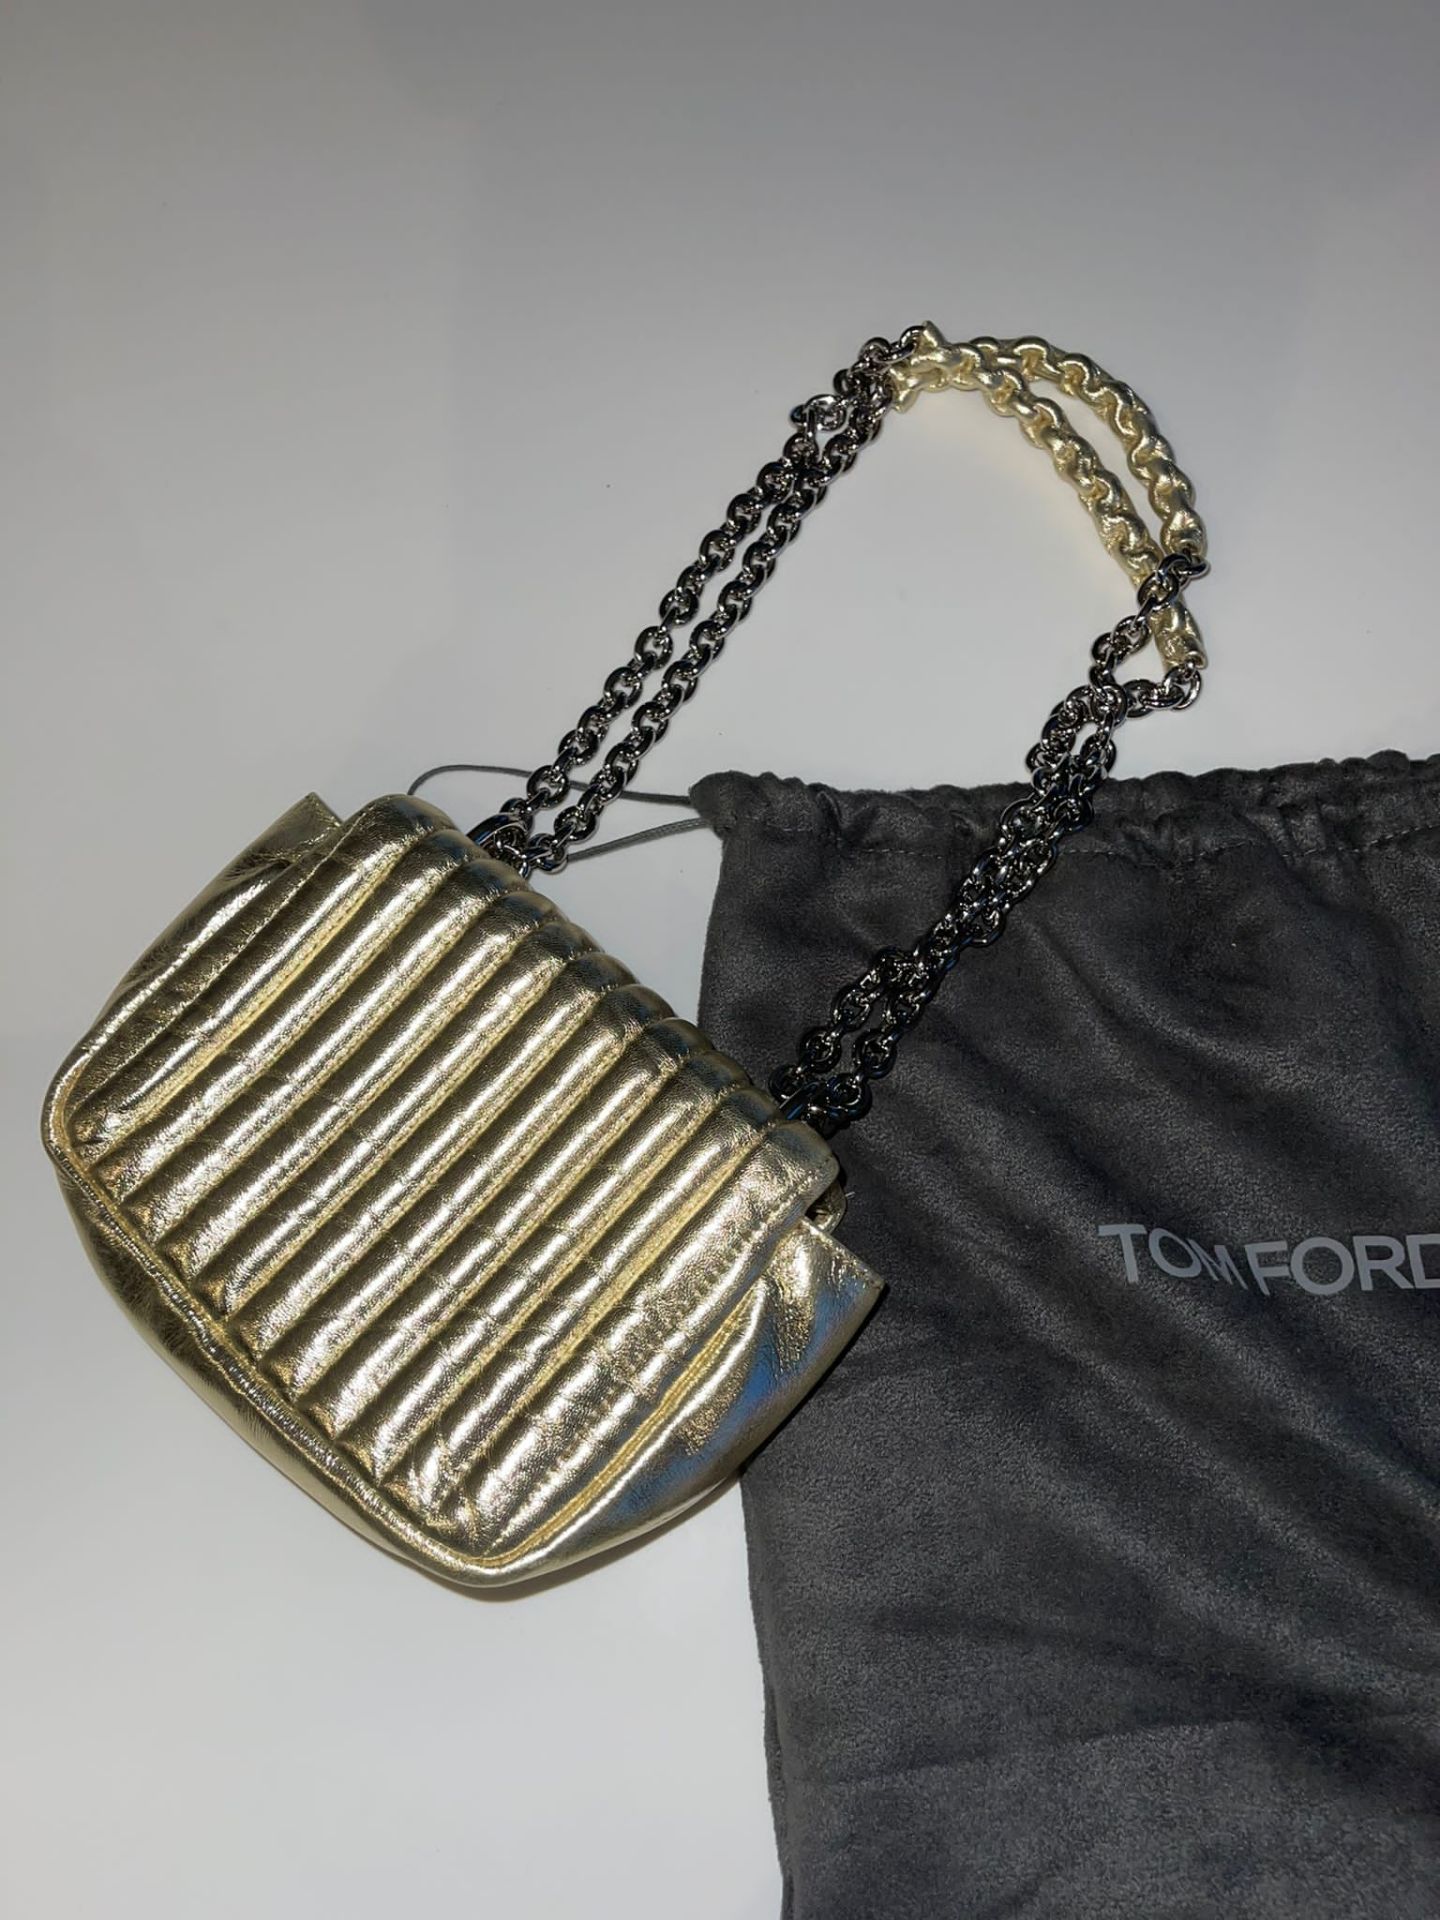 Tom Ford Gold Chain Strapped Handbag. RRP £1350.00. Luxury Eye Catching from Tom Ford once again. - Image 2 of 3